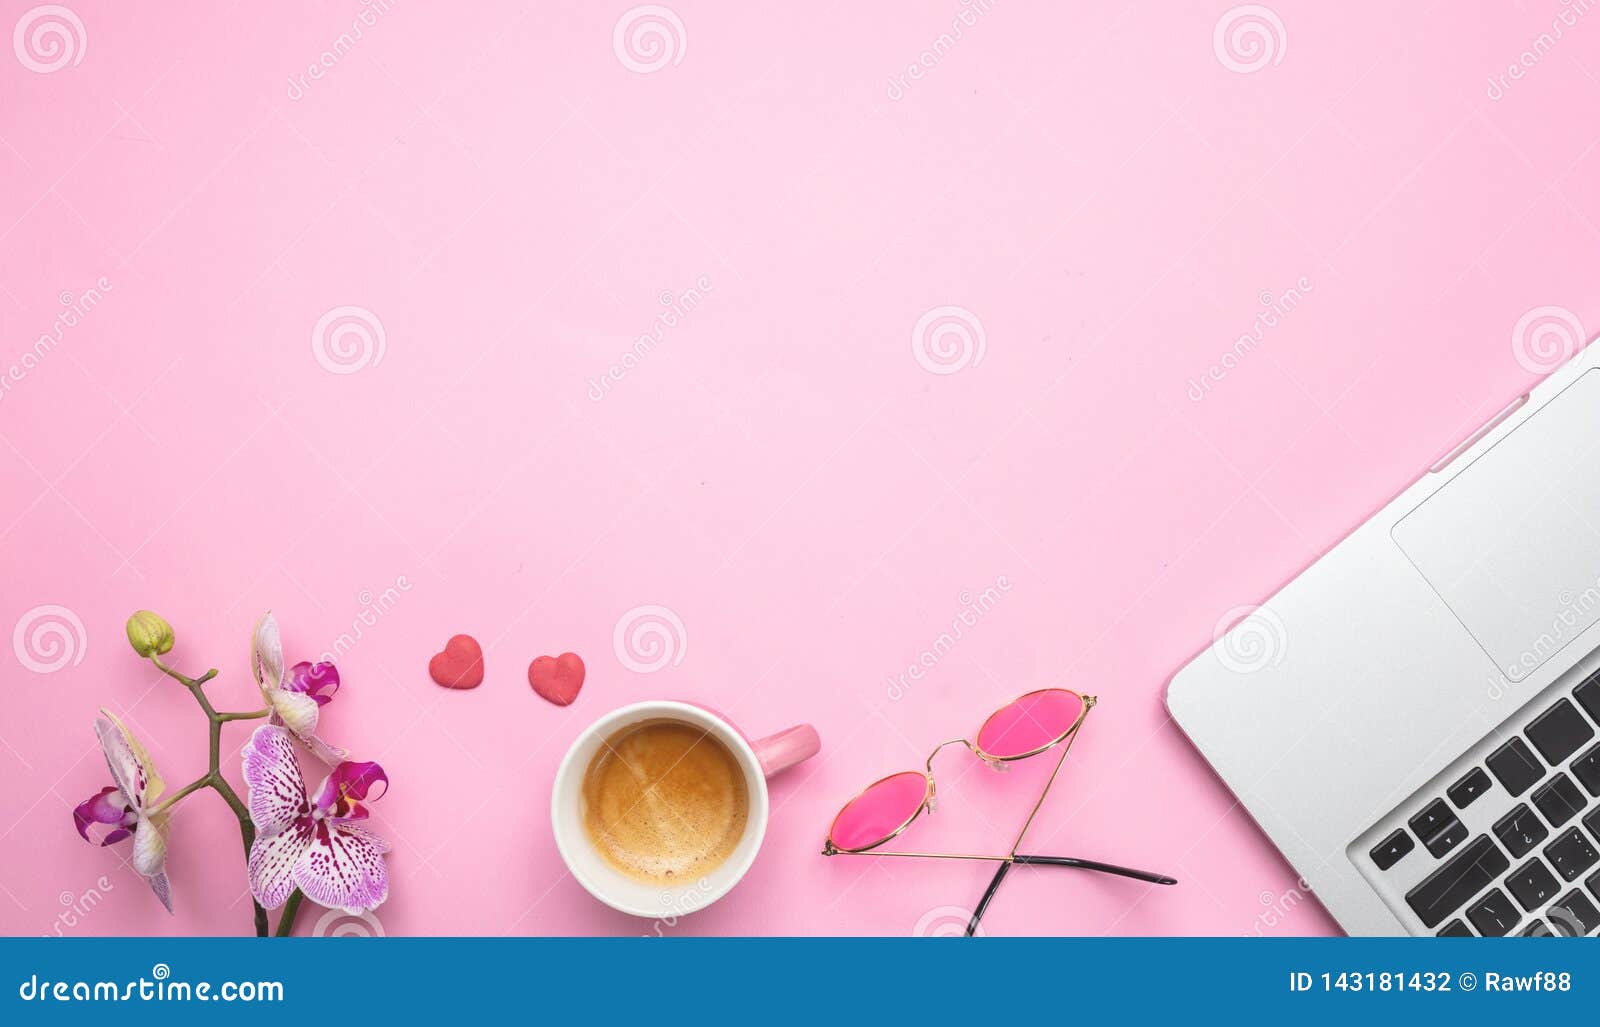 Flowers, Cup of Coffee and Laptop on Pink Desk Background, Copy Space ...